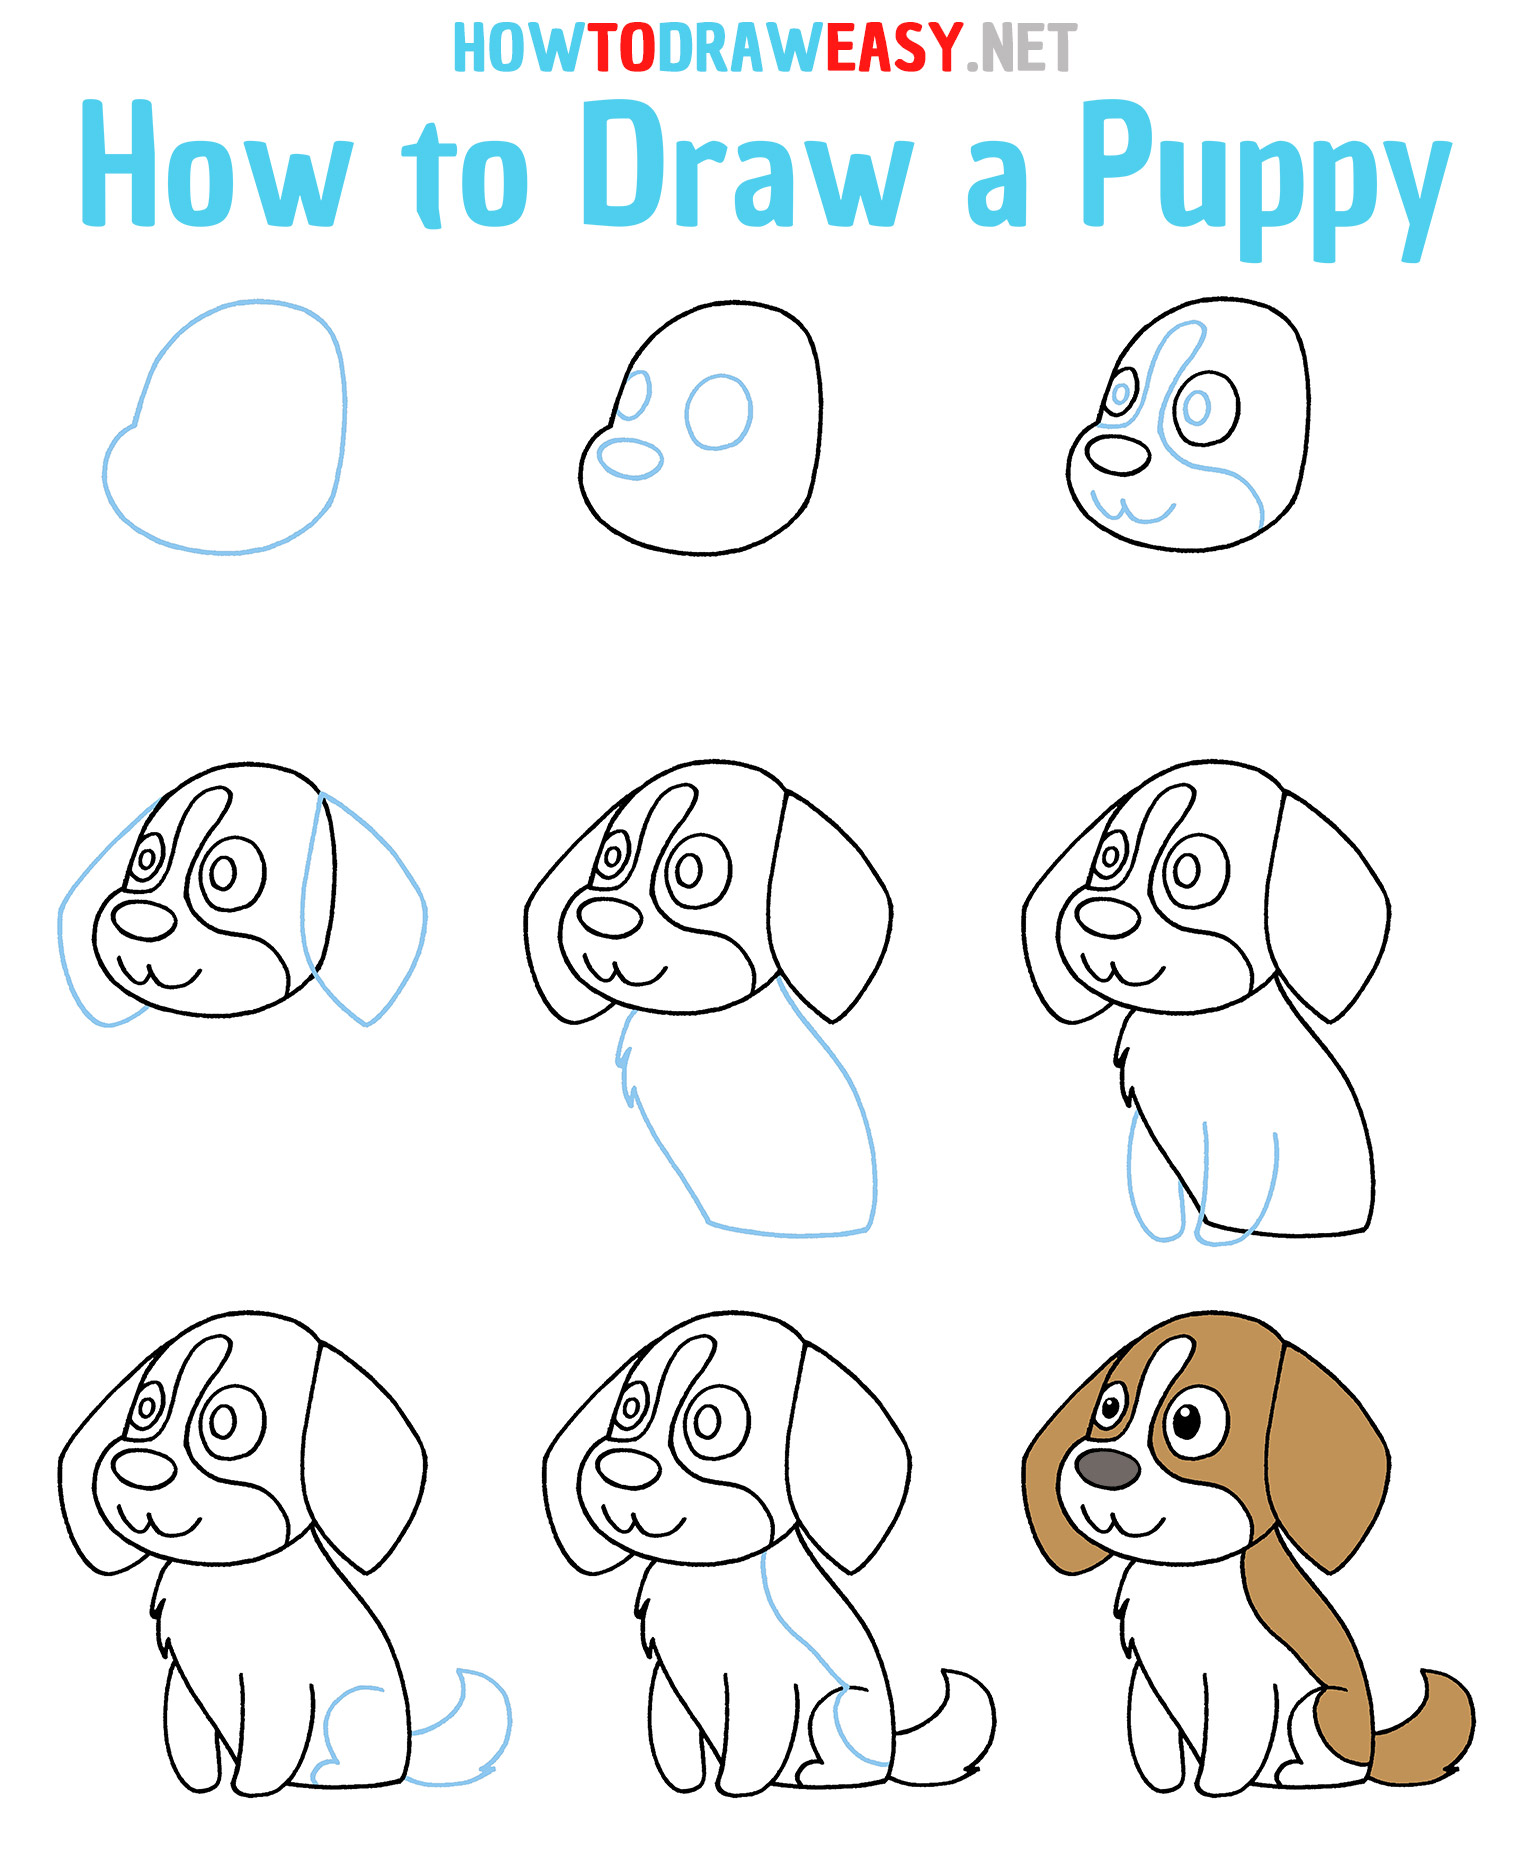 How to Draw a Puppy Step by Step